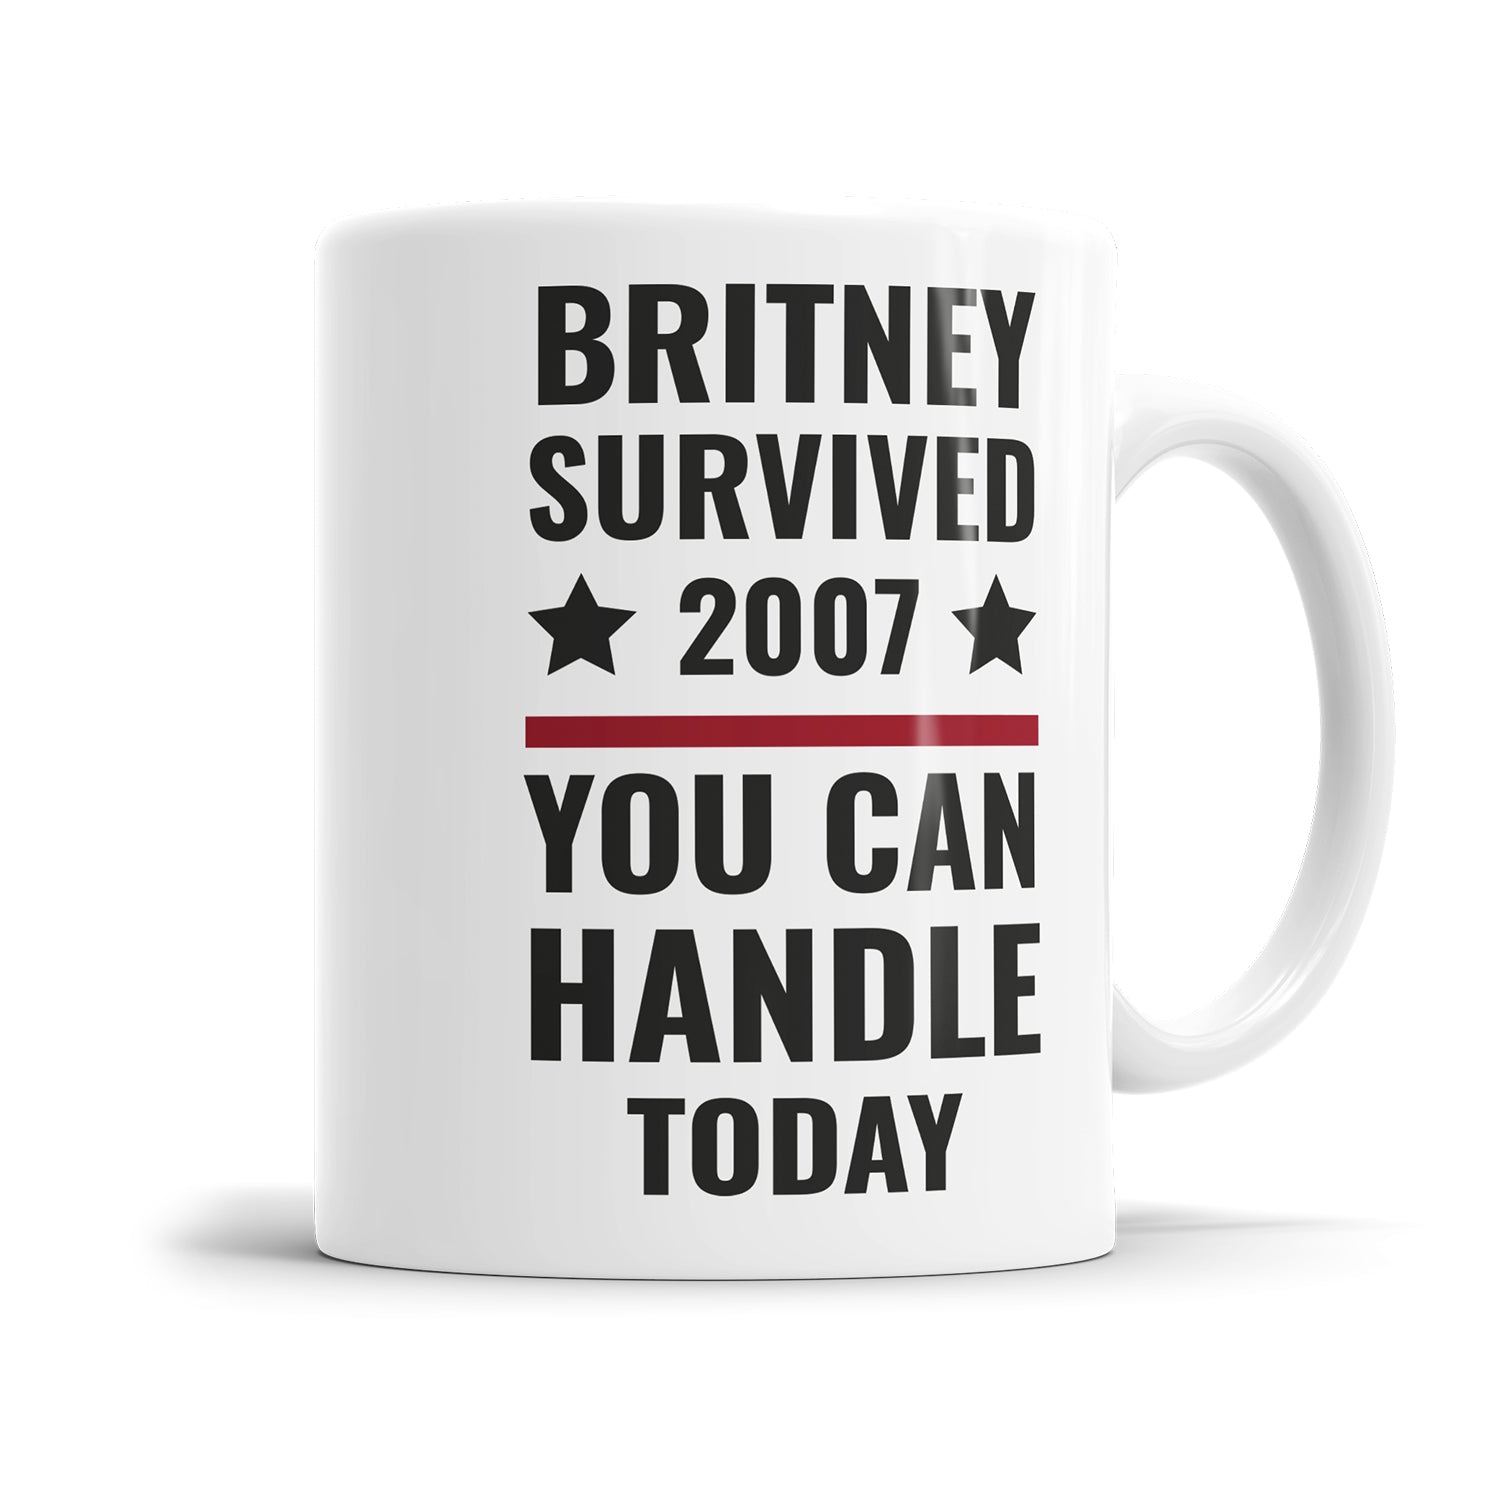 Britney survived 2007 you can handle today - Sprüche Tasse Fulima